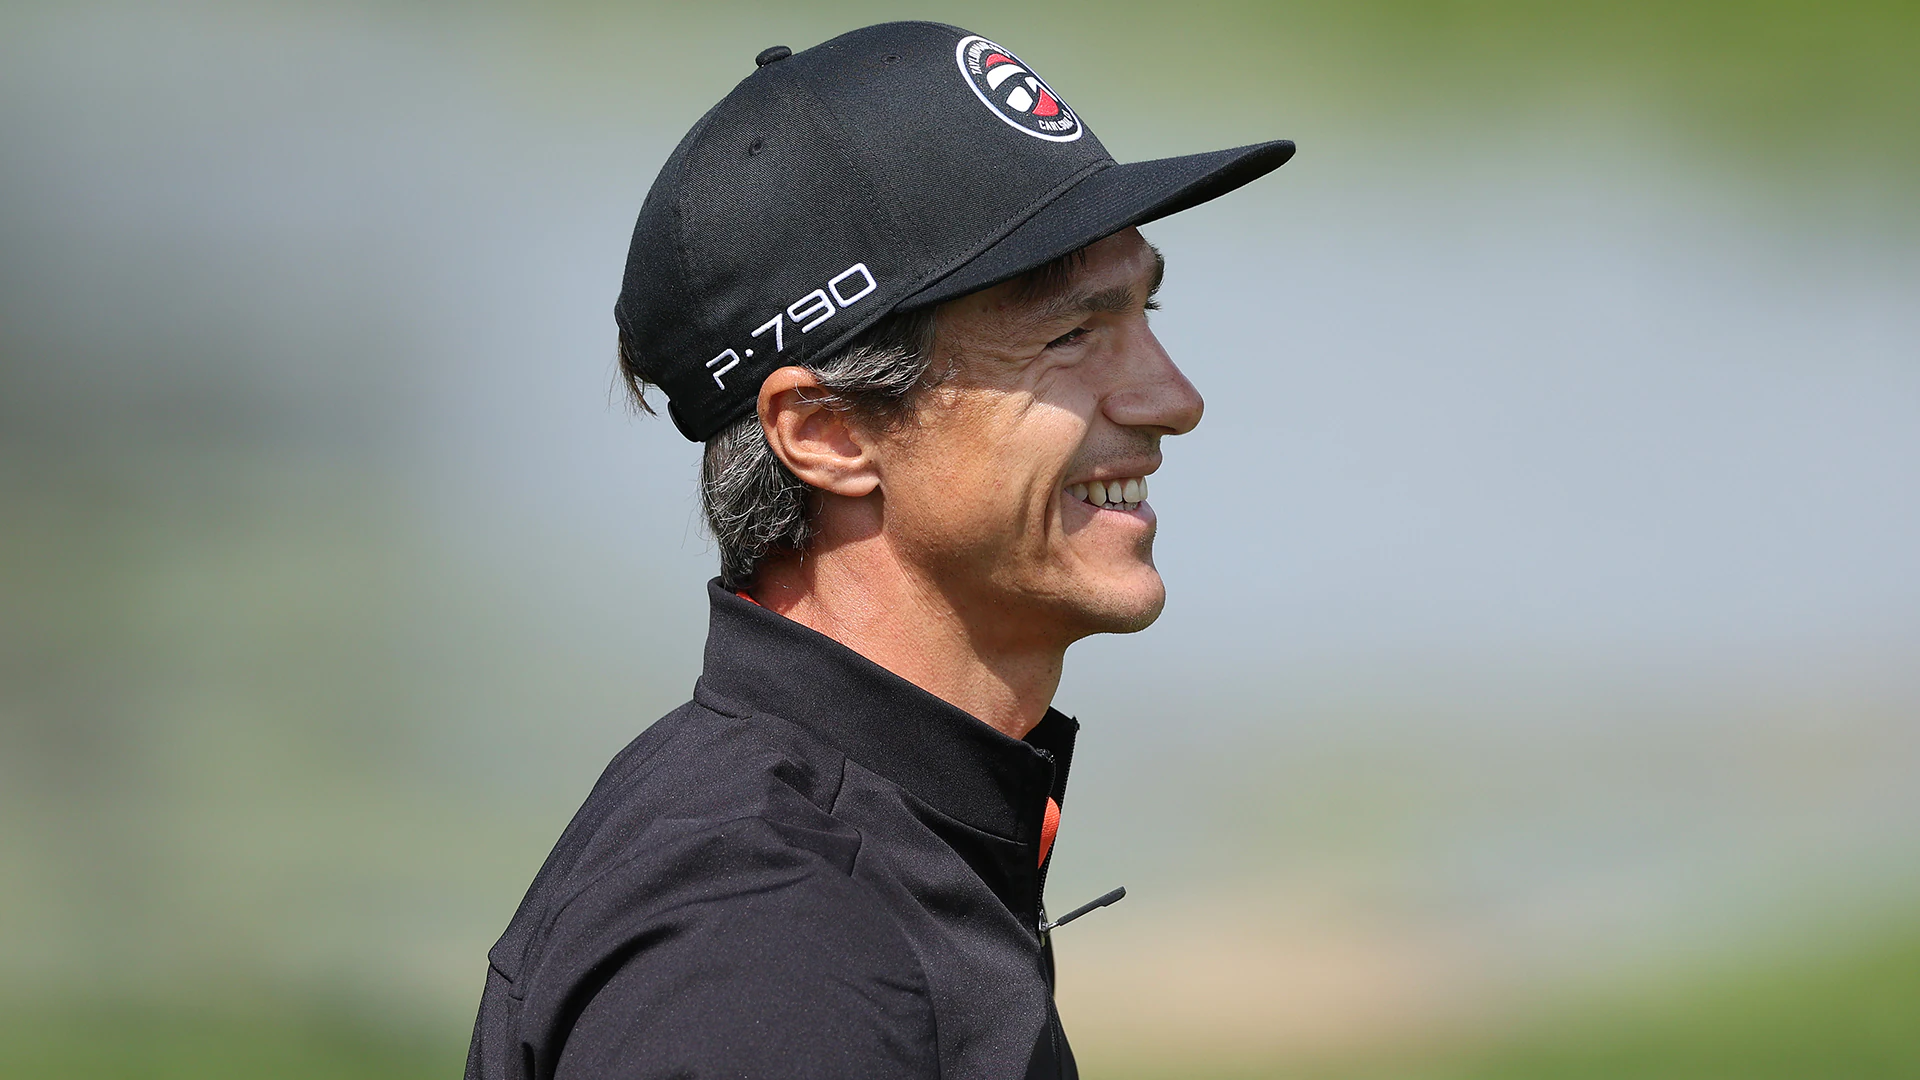 Looking to get career back on track, Thorbjorn Olesen tied for British Masters lead